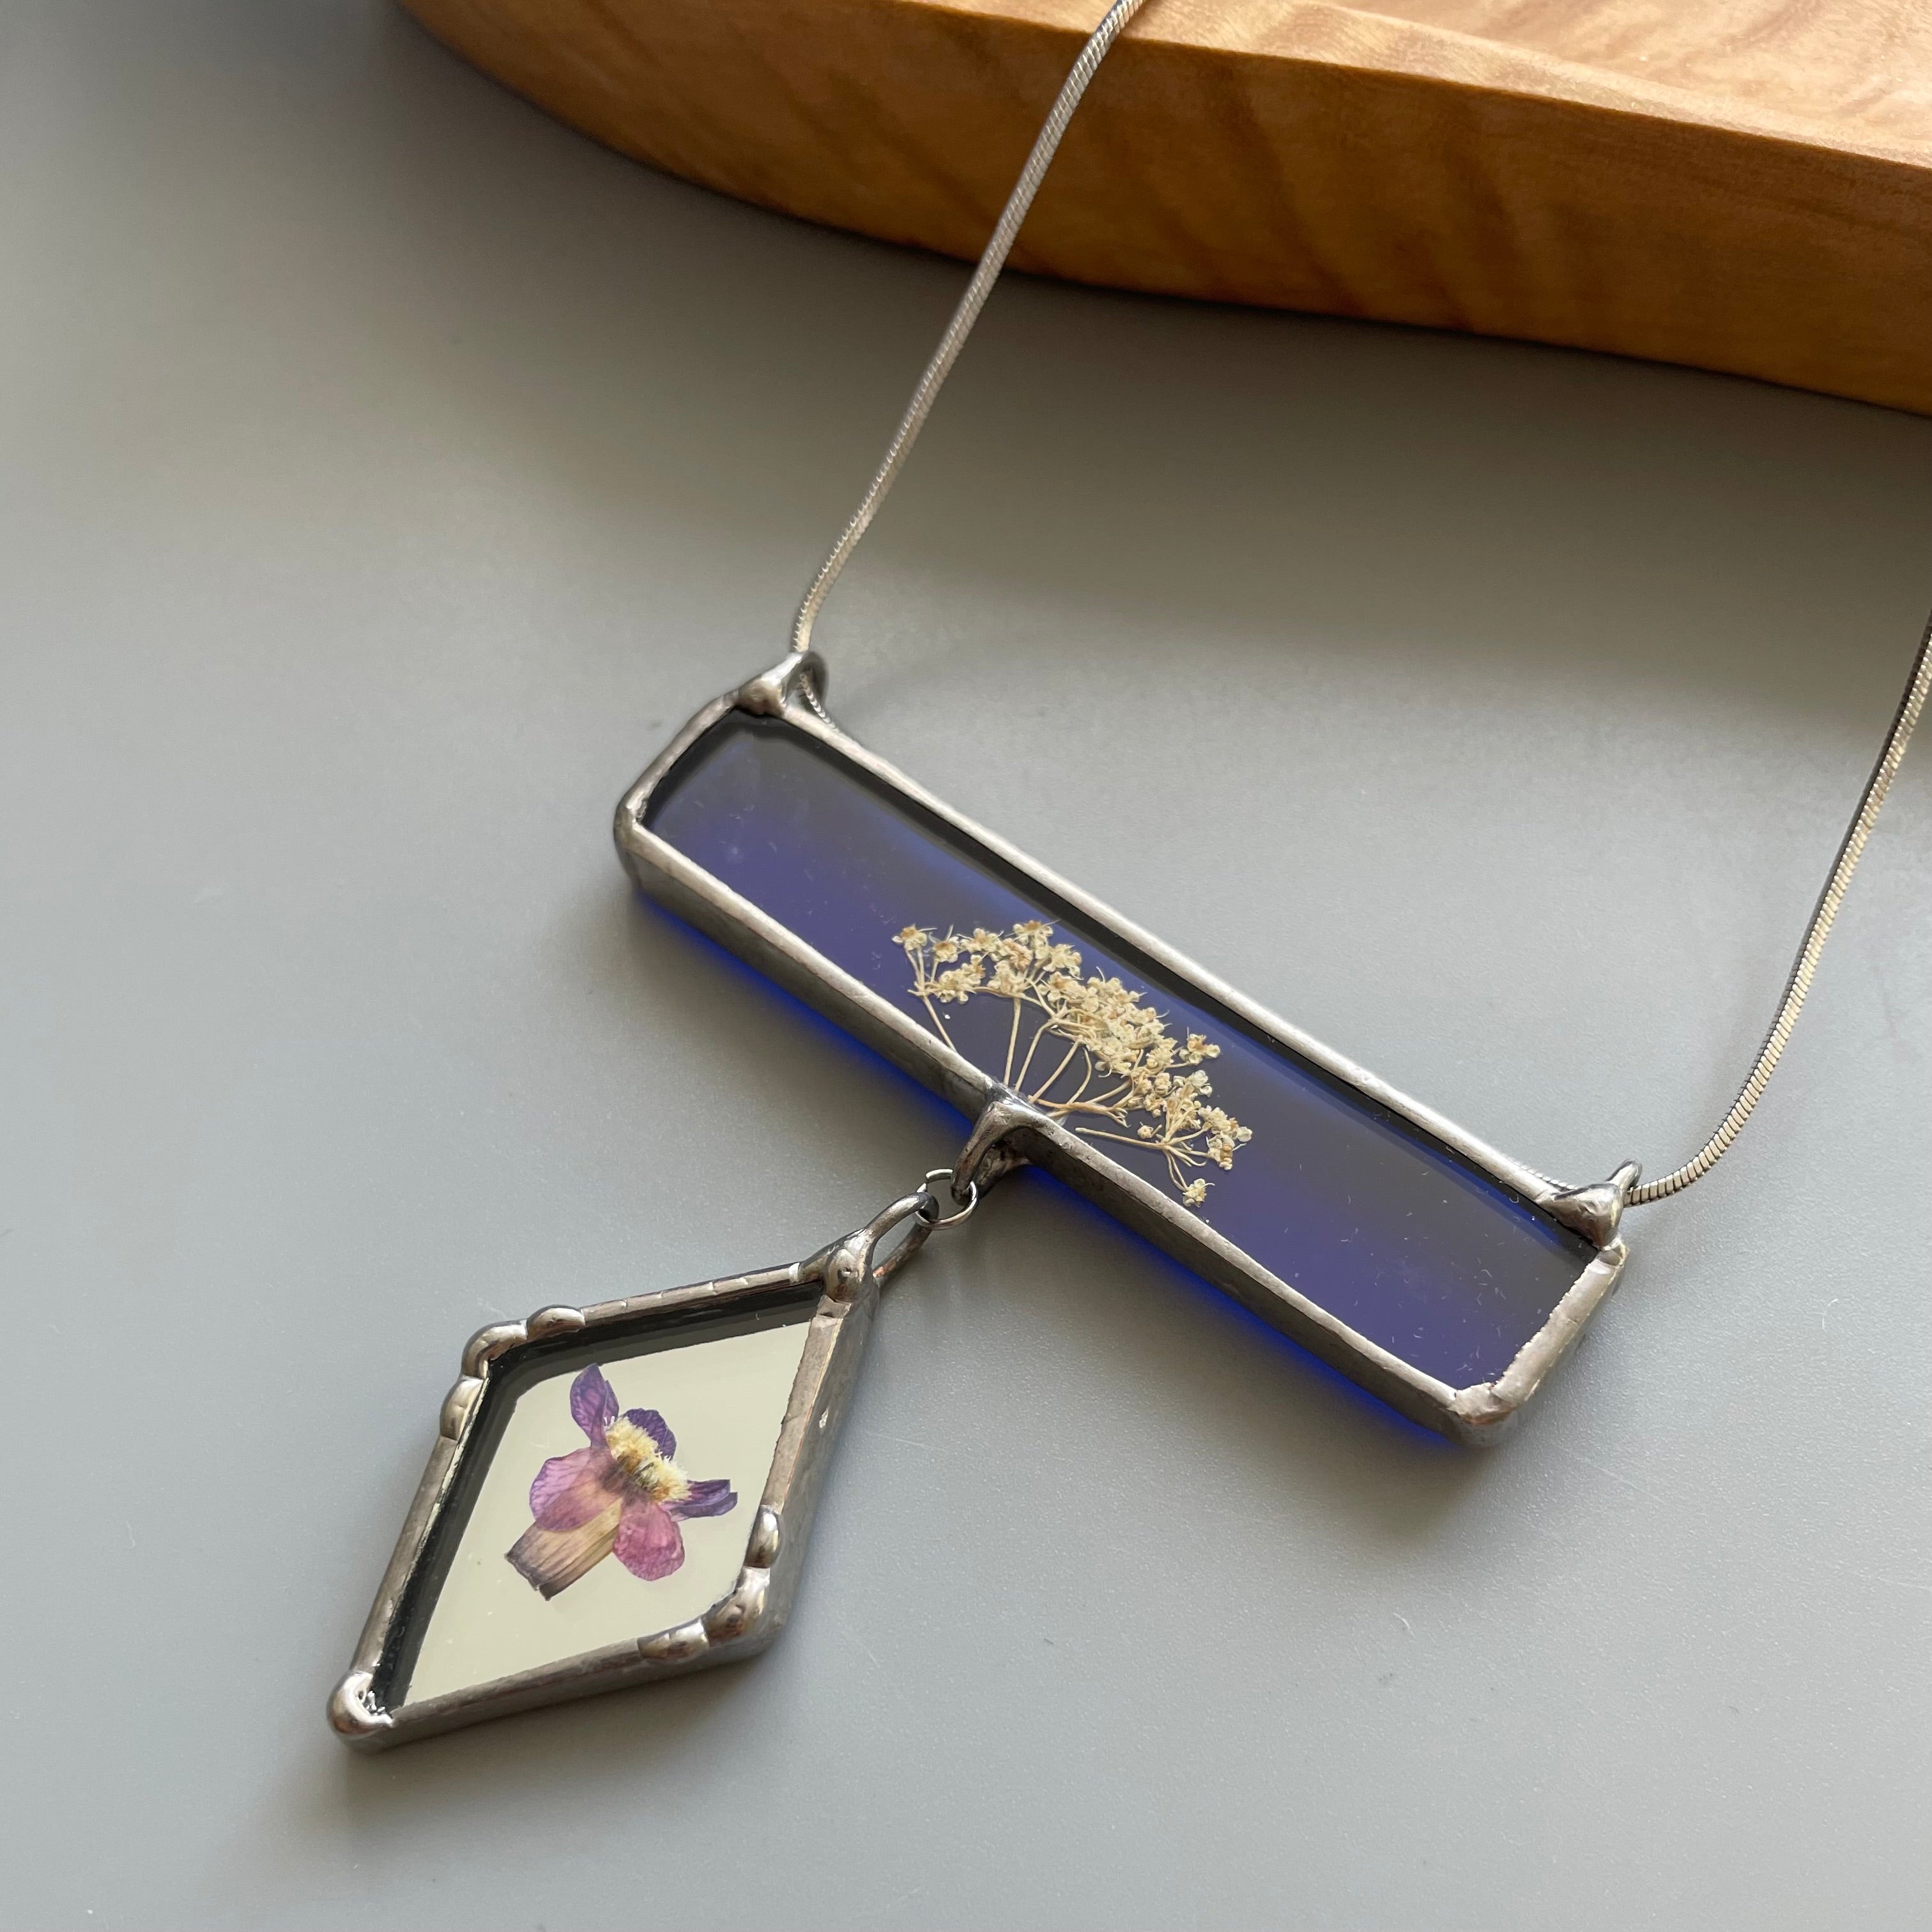 Stain Glass Necklace with Dried Flower and Mirror